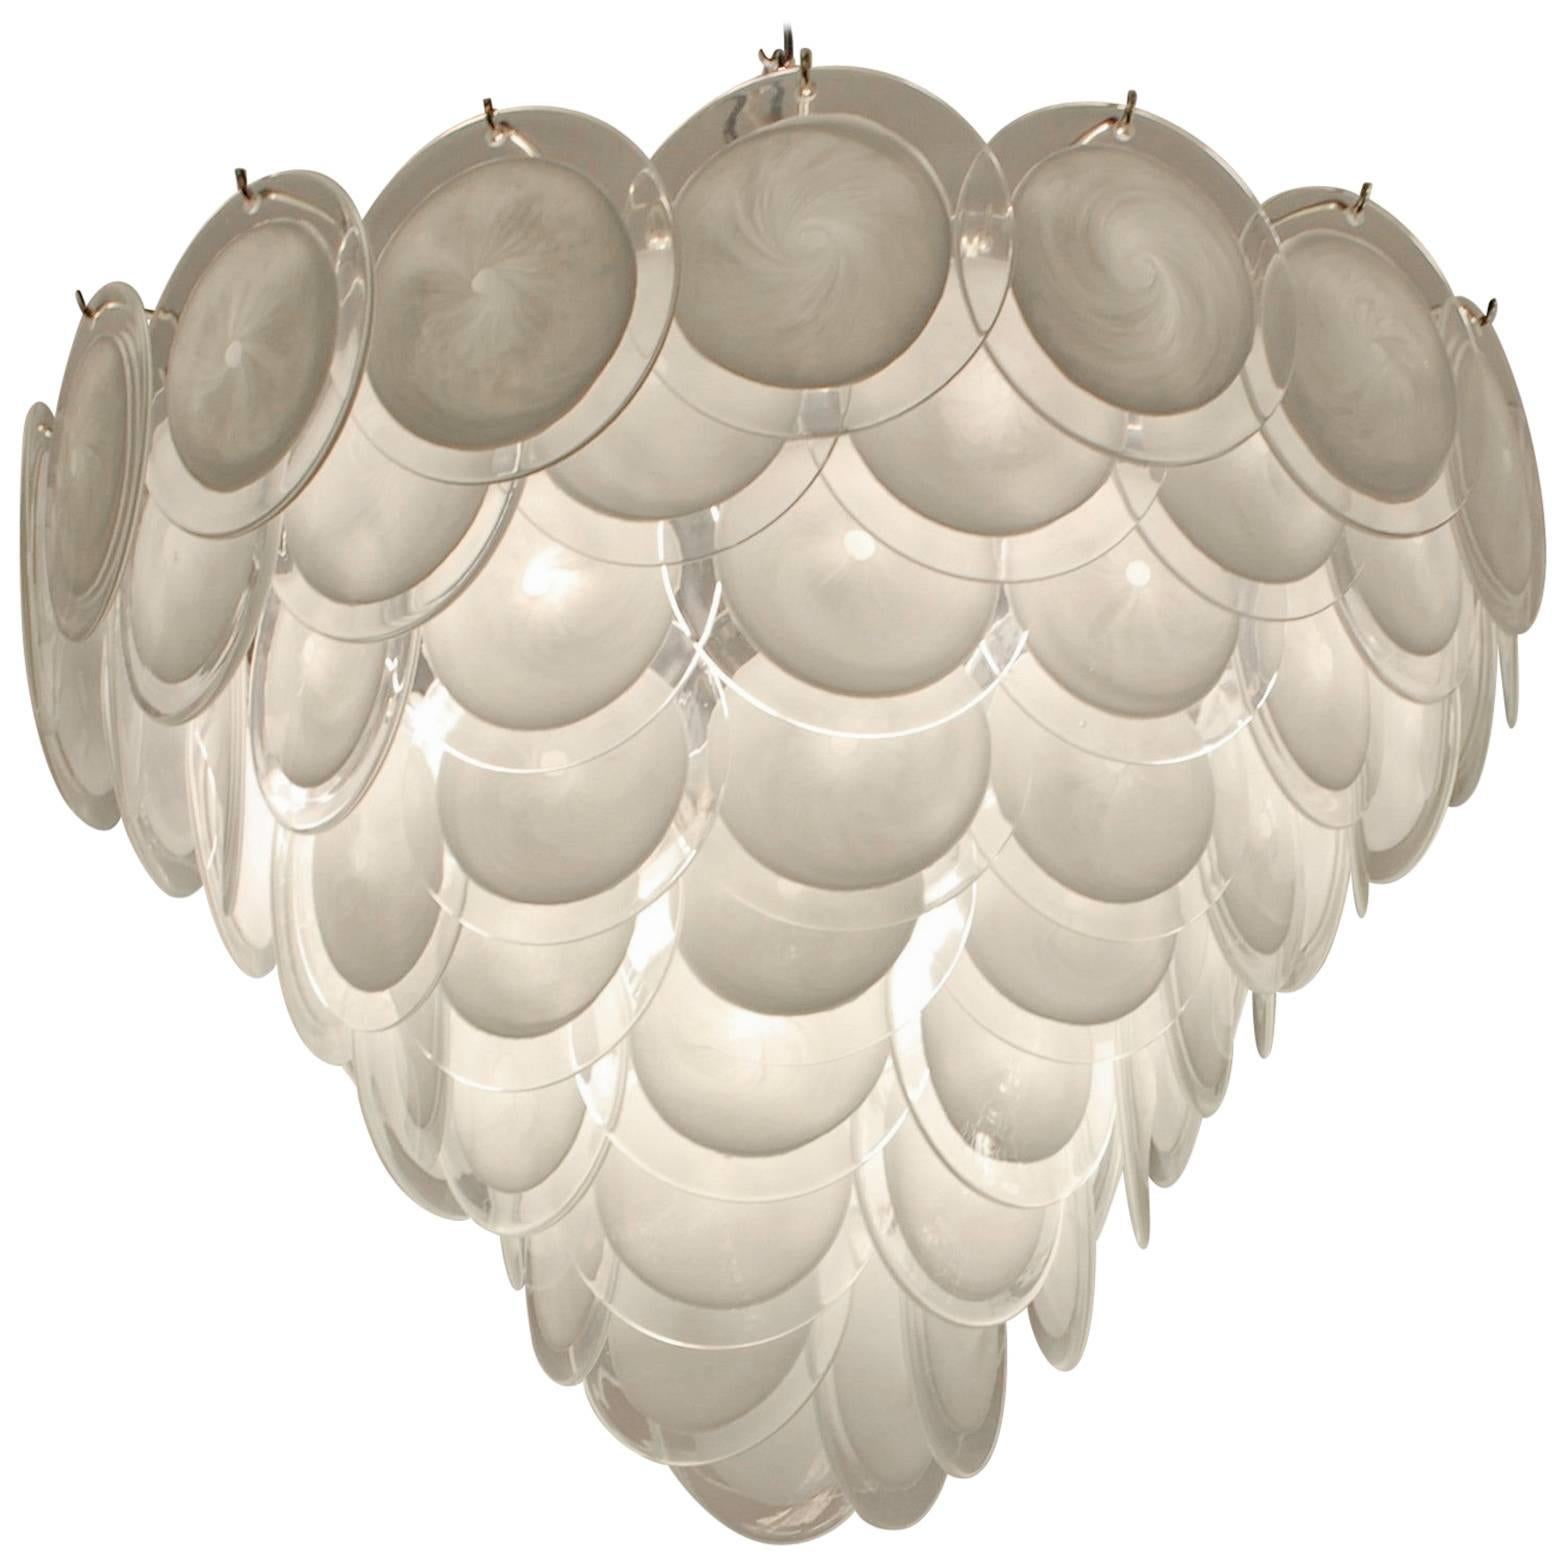 White Rullati Chandelier, Vistosi 1970 Attribution, Large and Oustanding